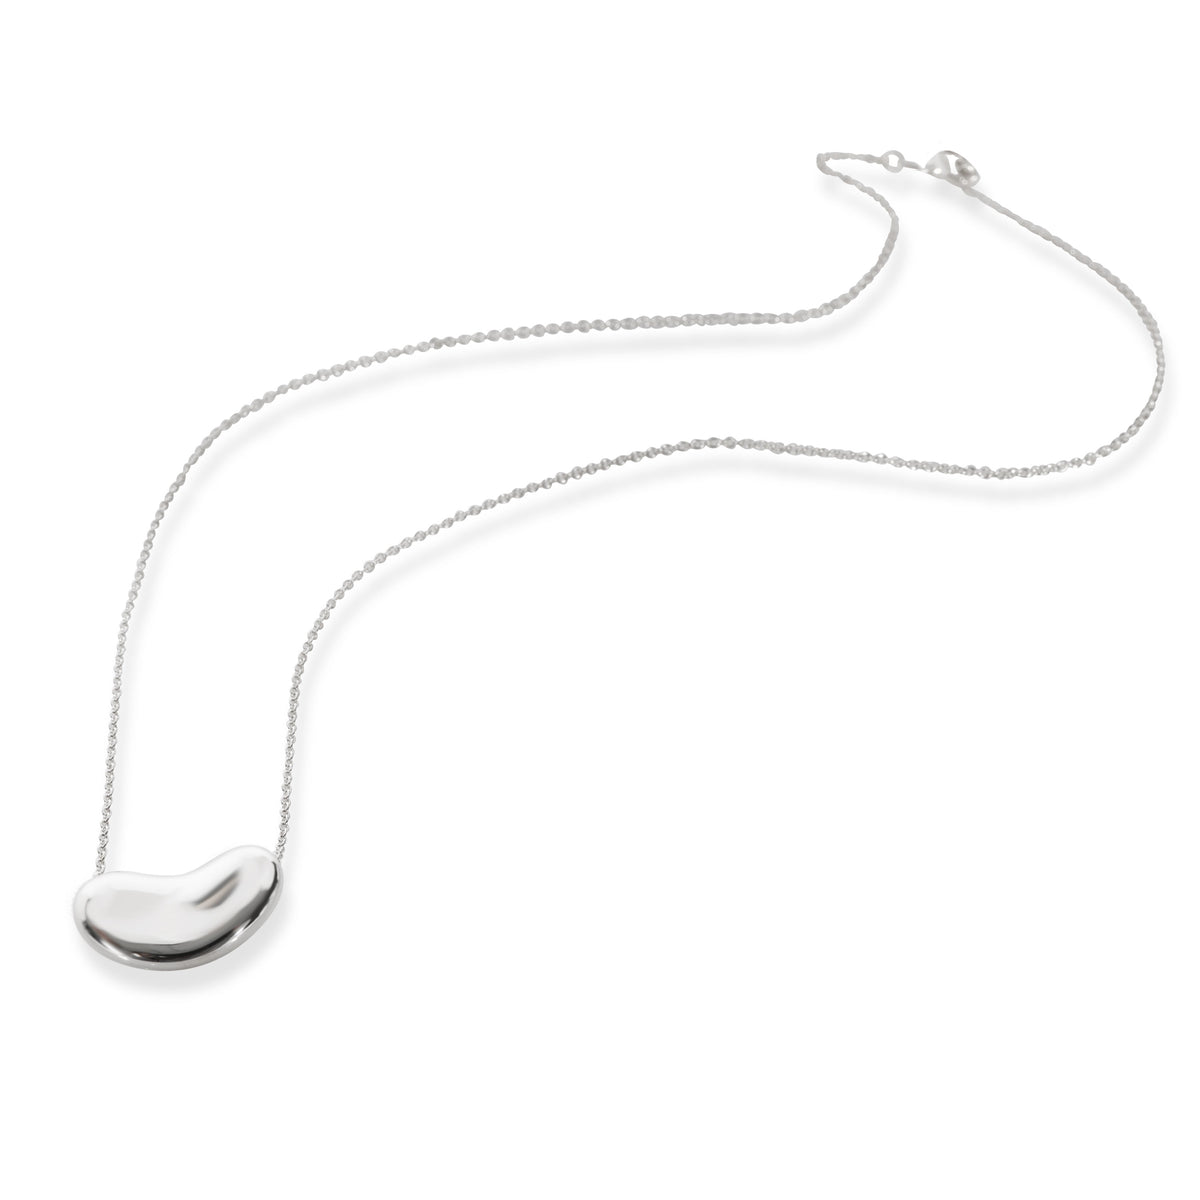 Tiffany & Co. Paloma Picasso Bean Necklace in Sterling Silver